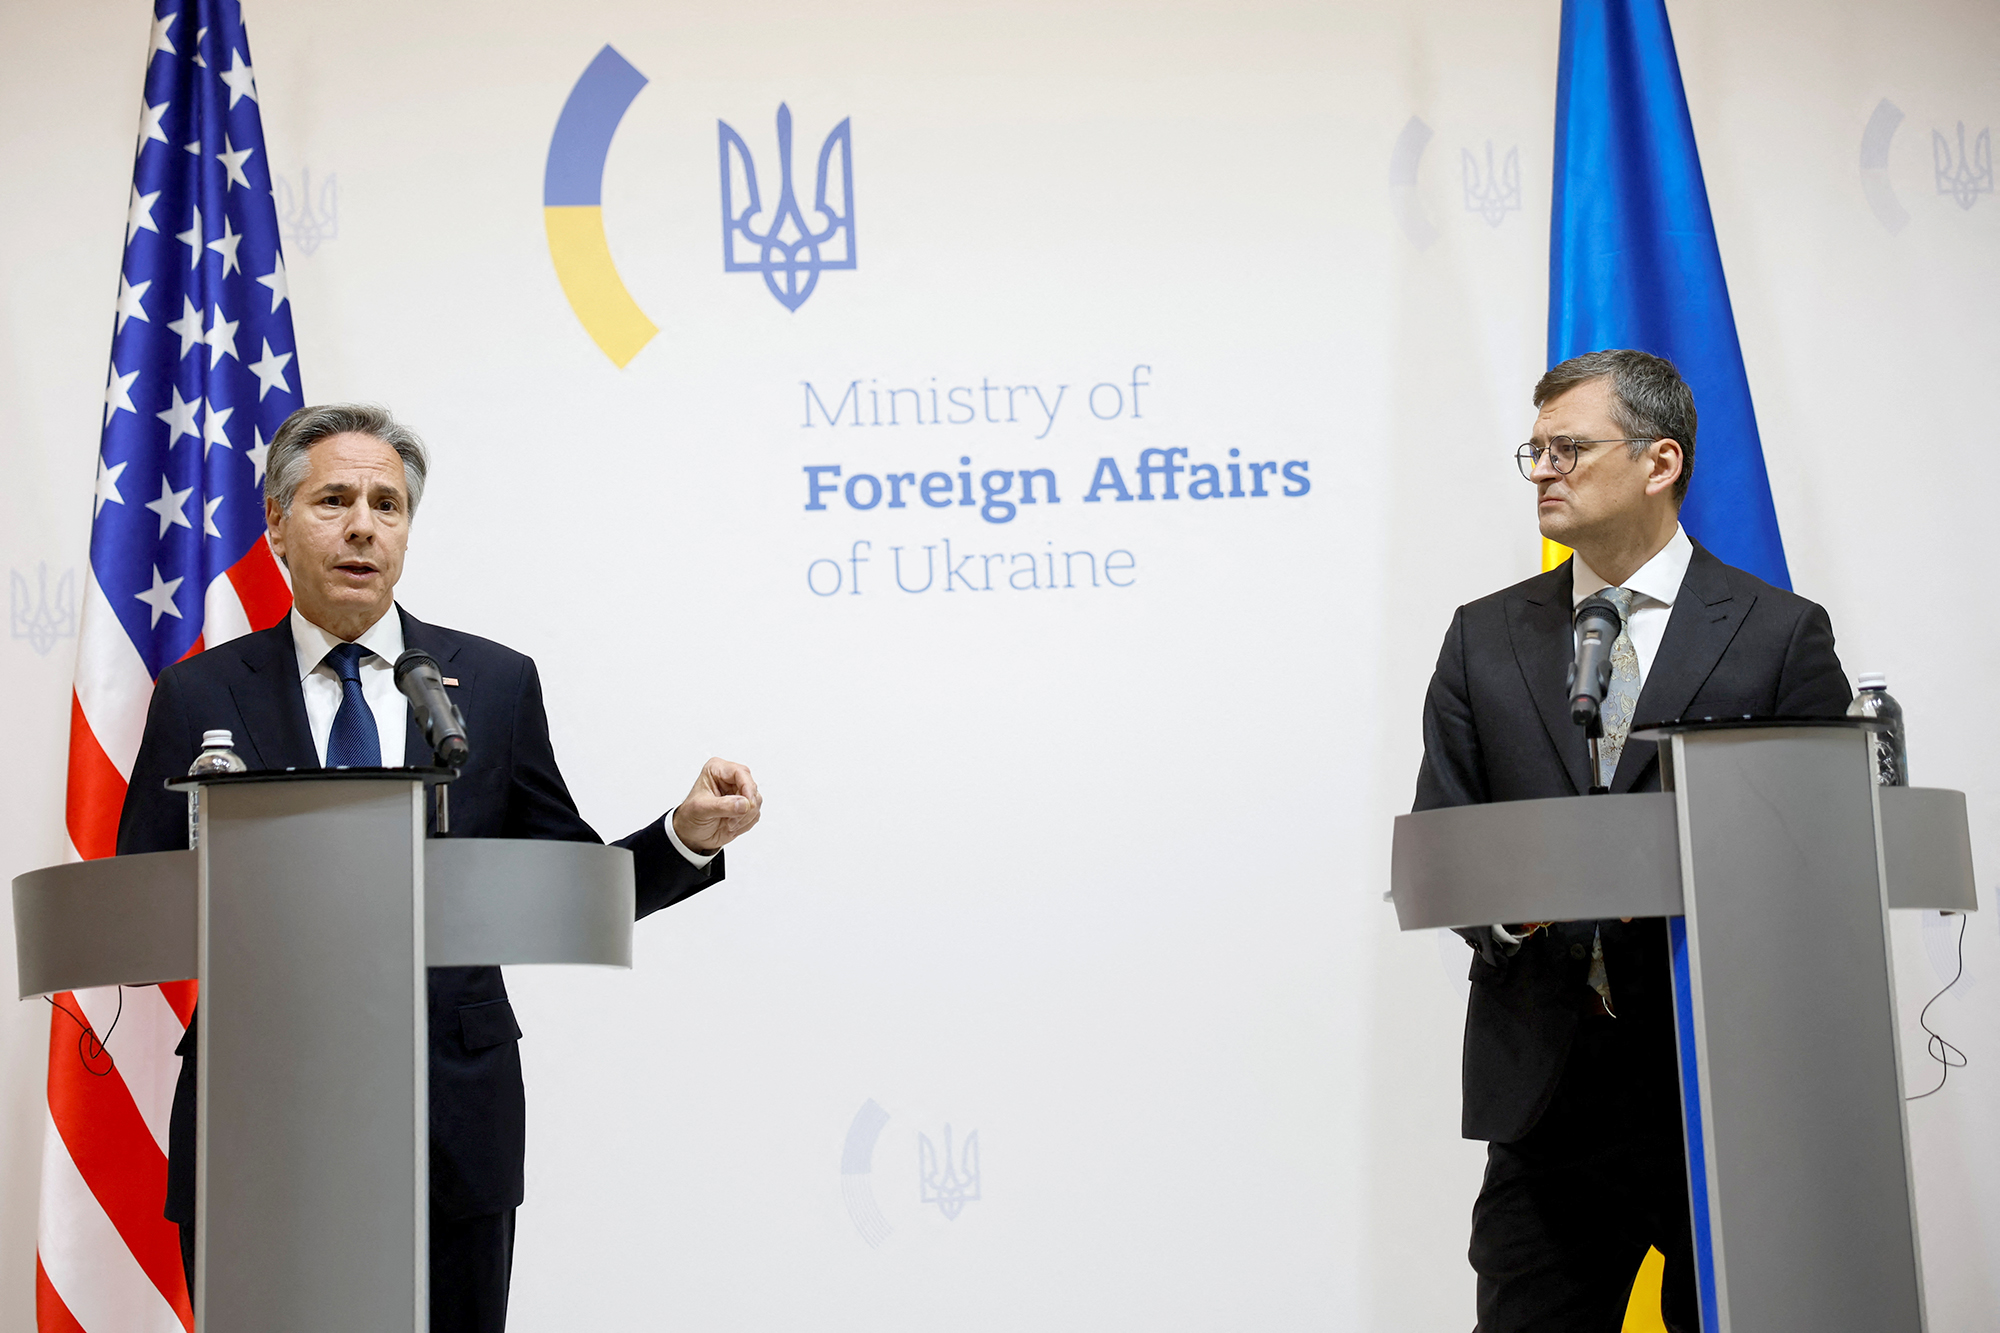 U.S. Secretary of State Antony Blinken, left, and Ukrainian Foreign Minister Dmytro Kuleba hold a joint press conference in Kyiv, Ukraine, on May 15.